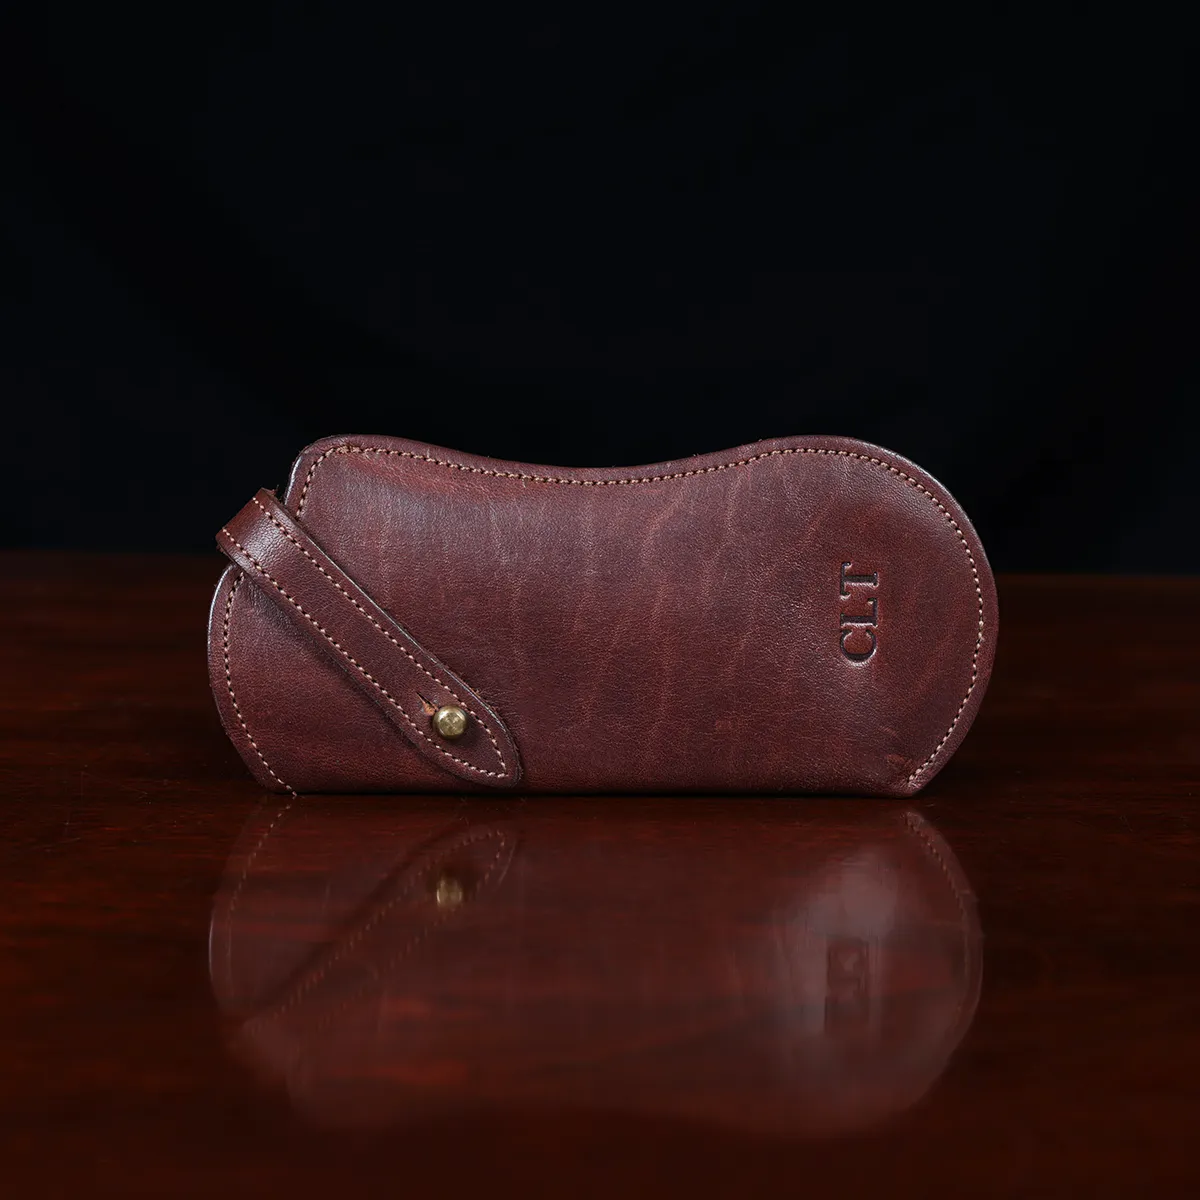 Brown leather No. 2 Eyeglass Case on top of a wooden table with a dark background